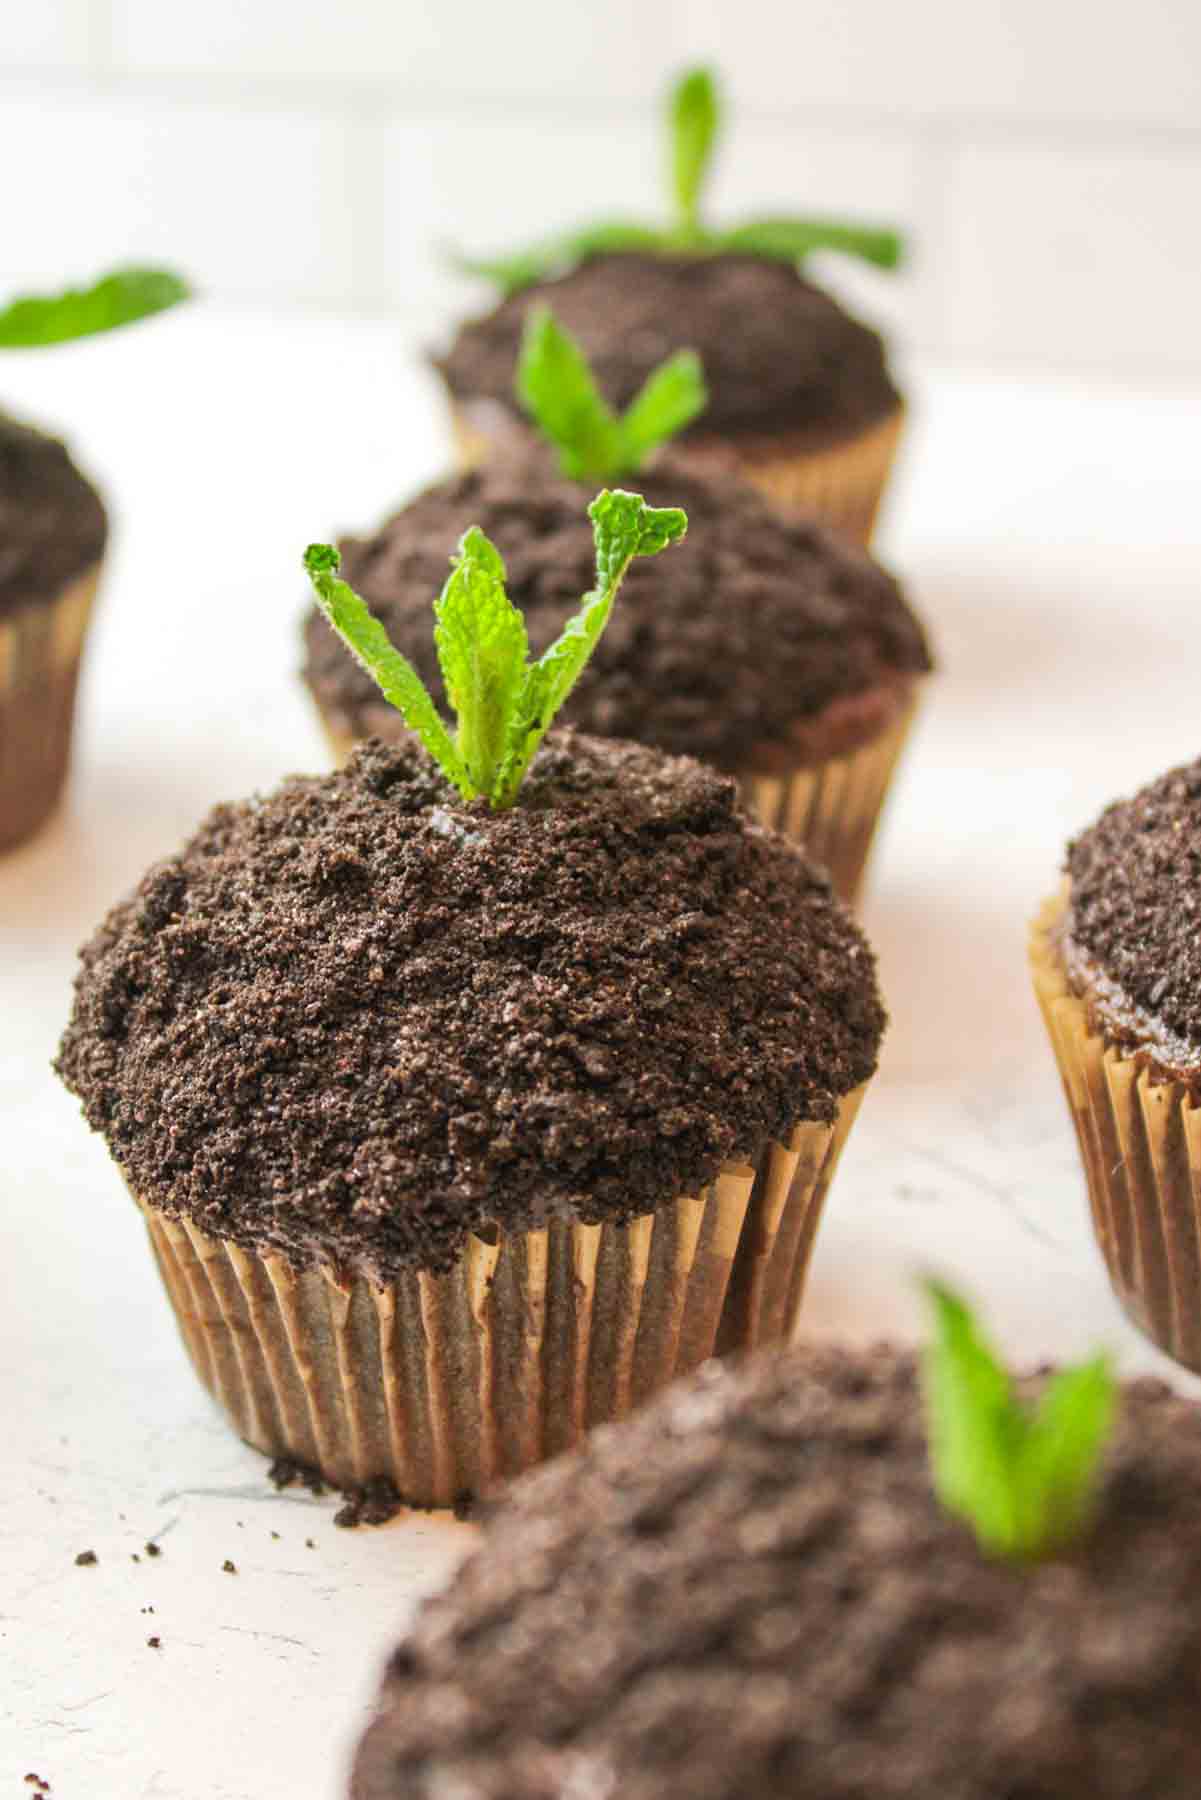 one in focus plant cupcake with dirt cookie crumbs